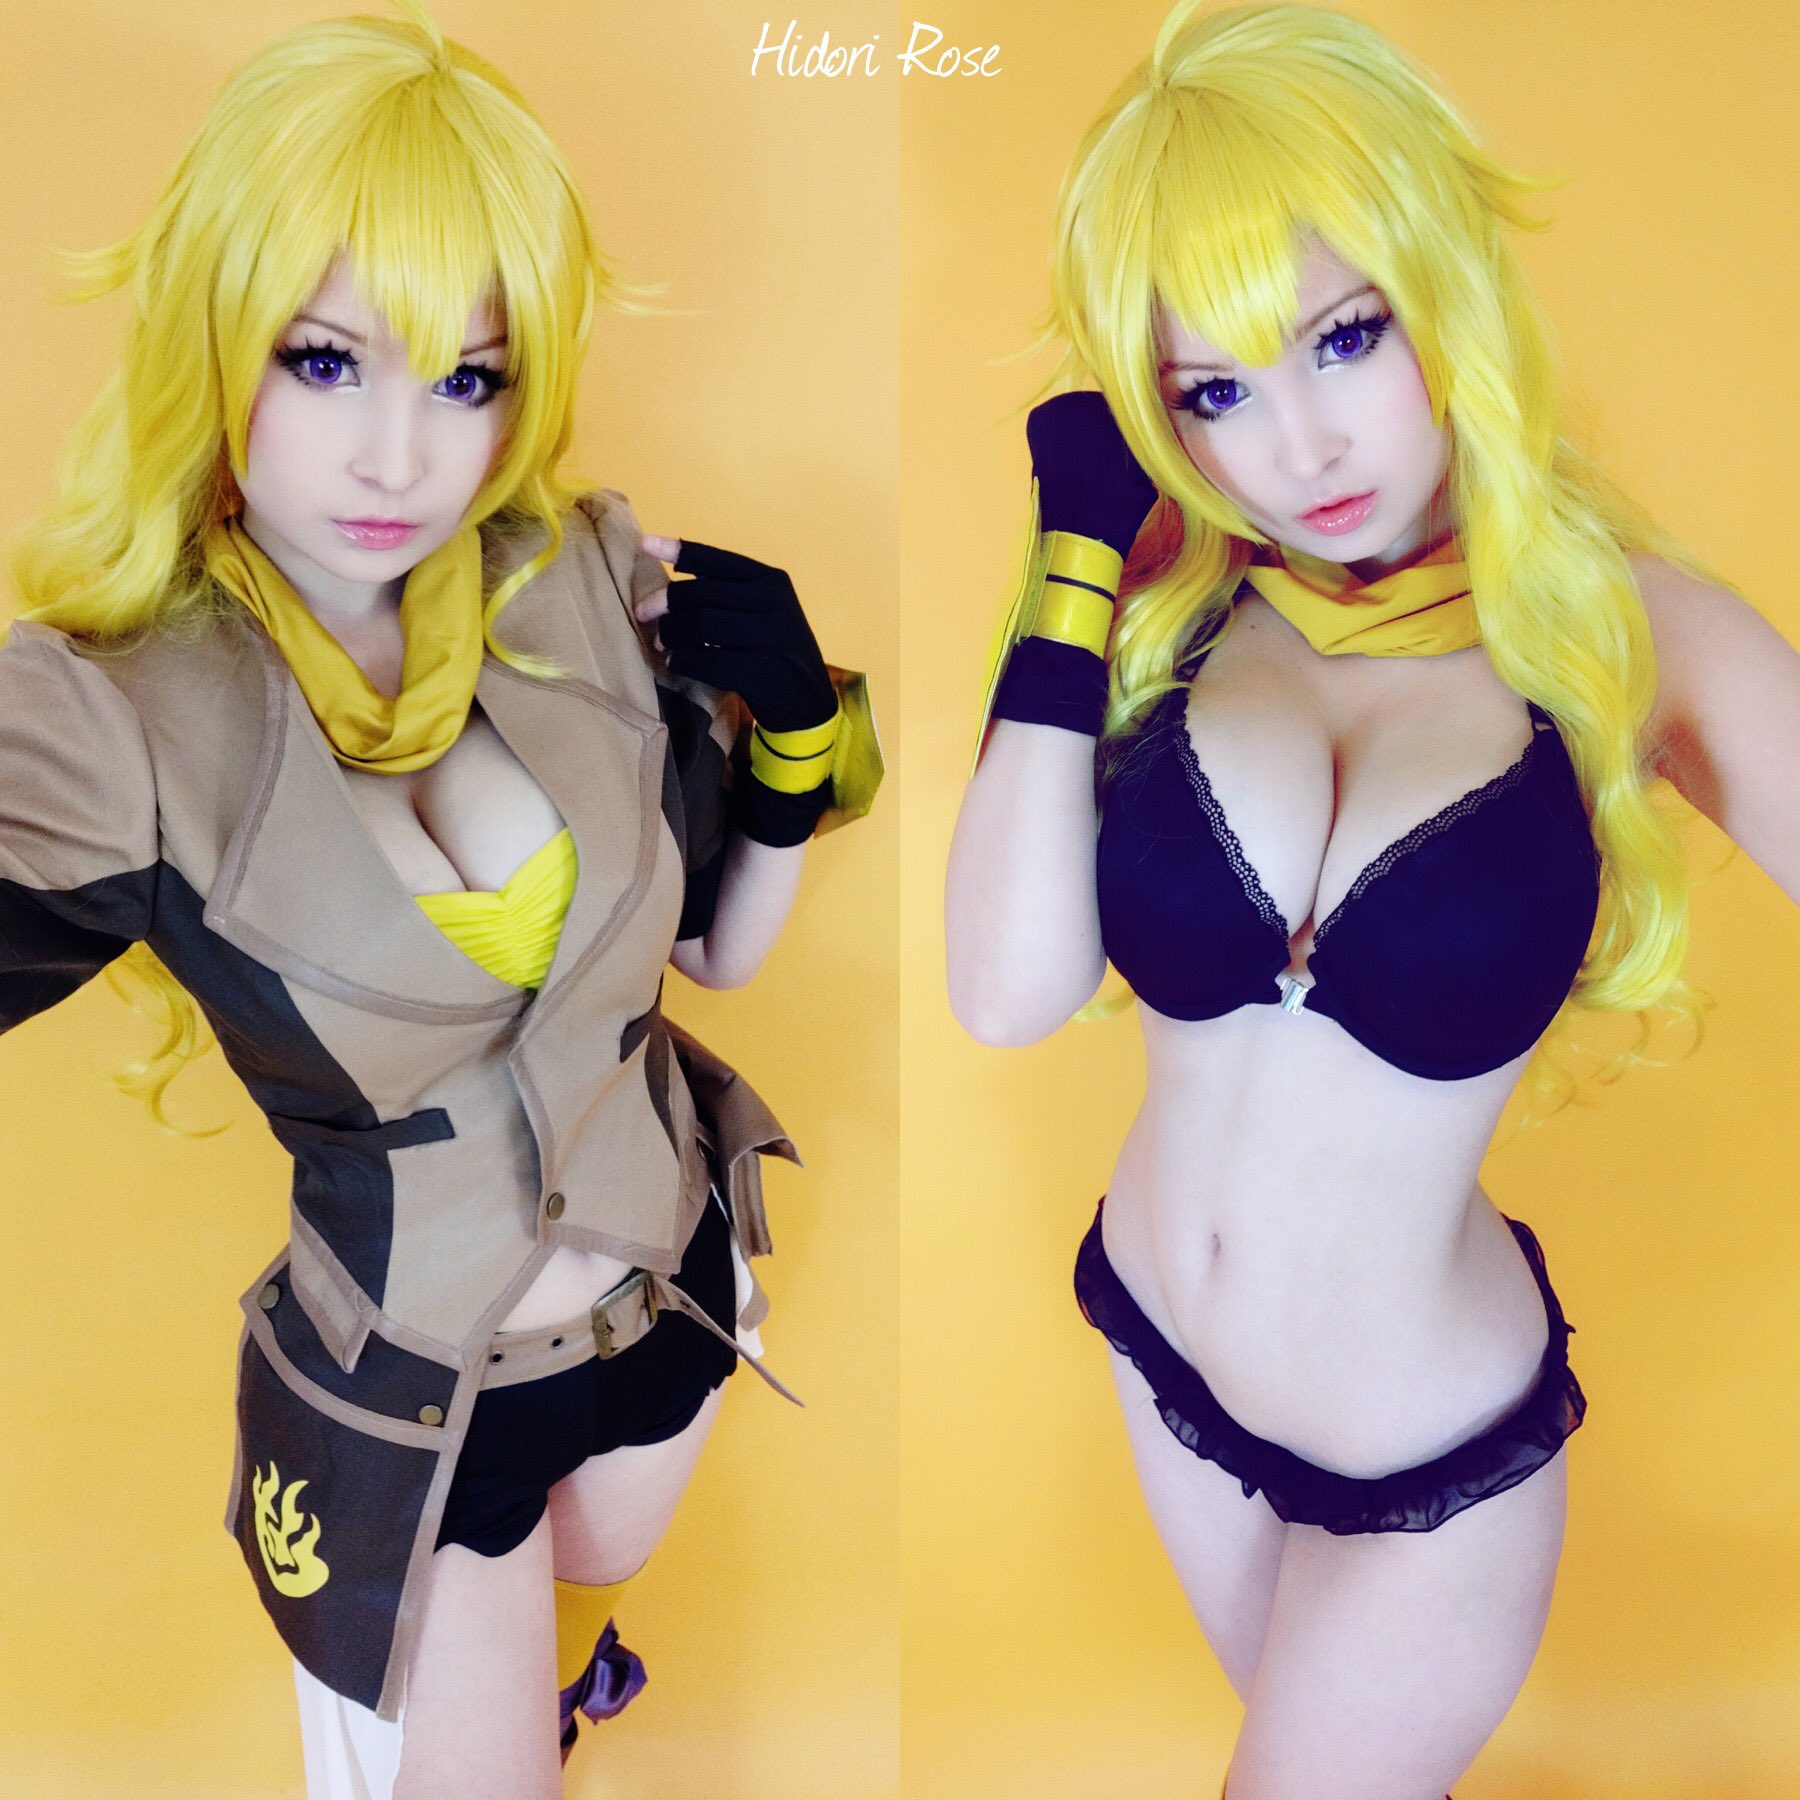 🌹Hidori Rose 🌹 on X: Yang Xiao Long onoff! Also a lewd selfies set  dropped on Patreon for all my Rosebuds including 1$ tier 🌹💛  t.coq7UXCjKFNT #YangXiaoLong #RoosterTeeth #RWBY #Cosplay  t.coMGitG9mPPj 